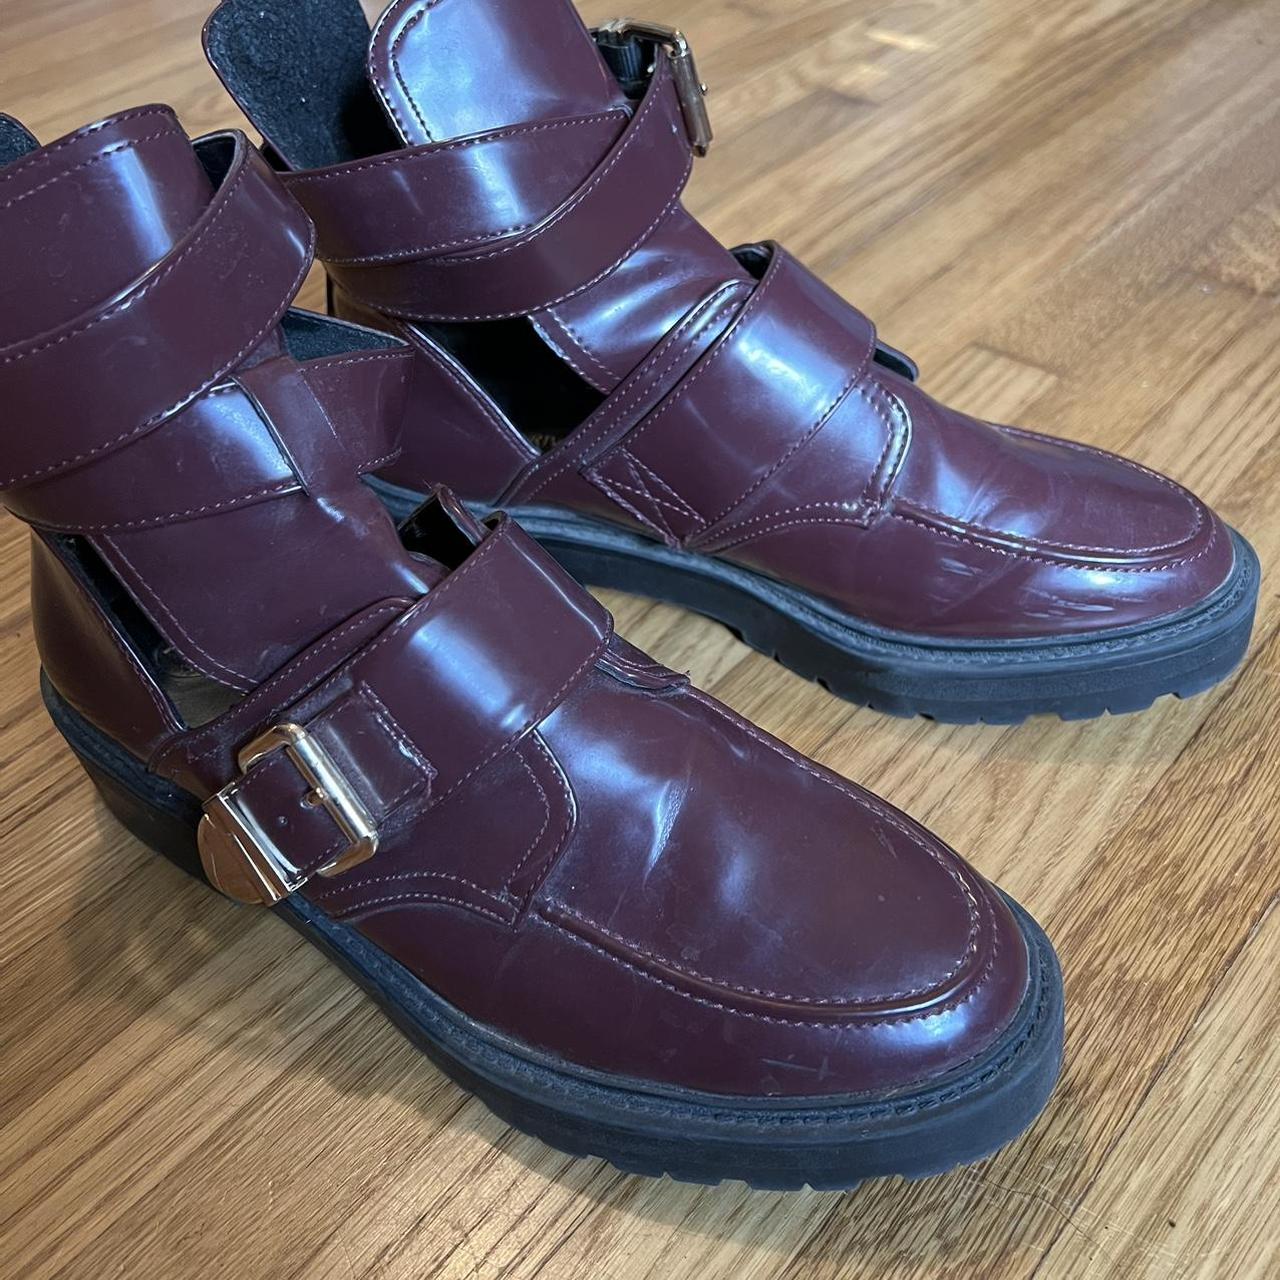 River Island Women's Burgundy and Gold Boots (3)